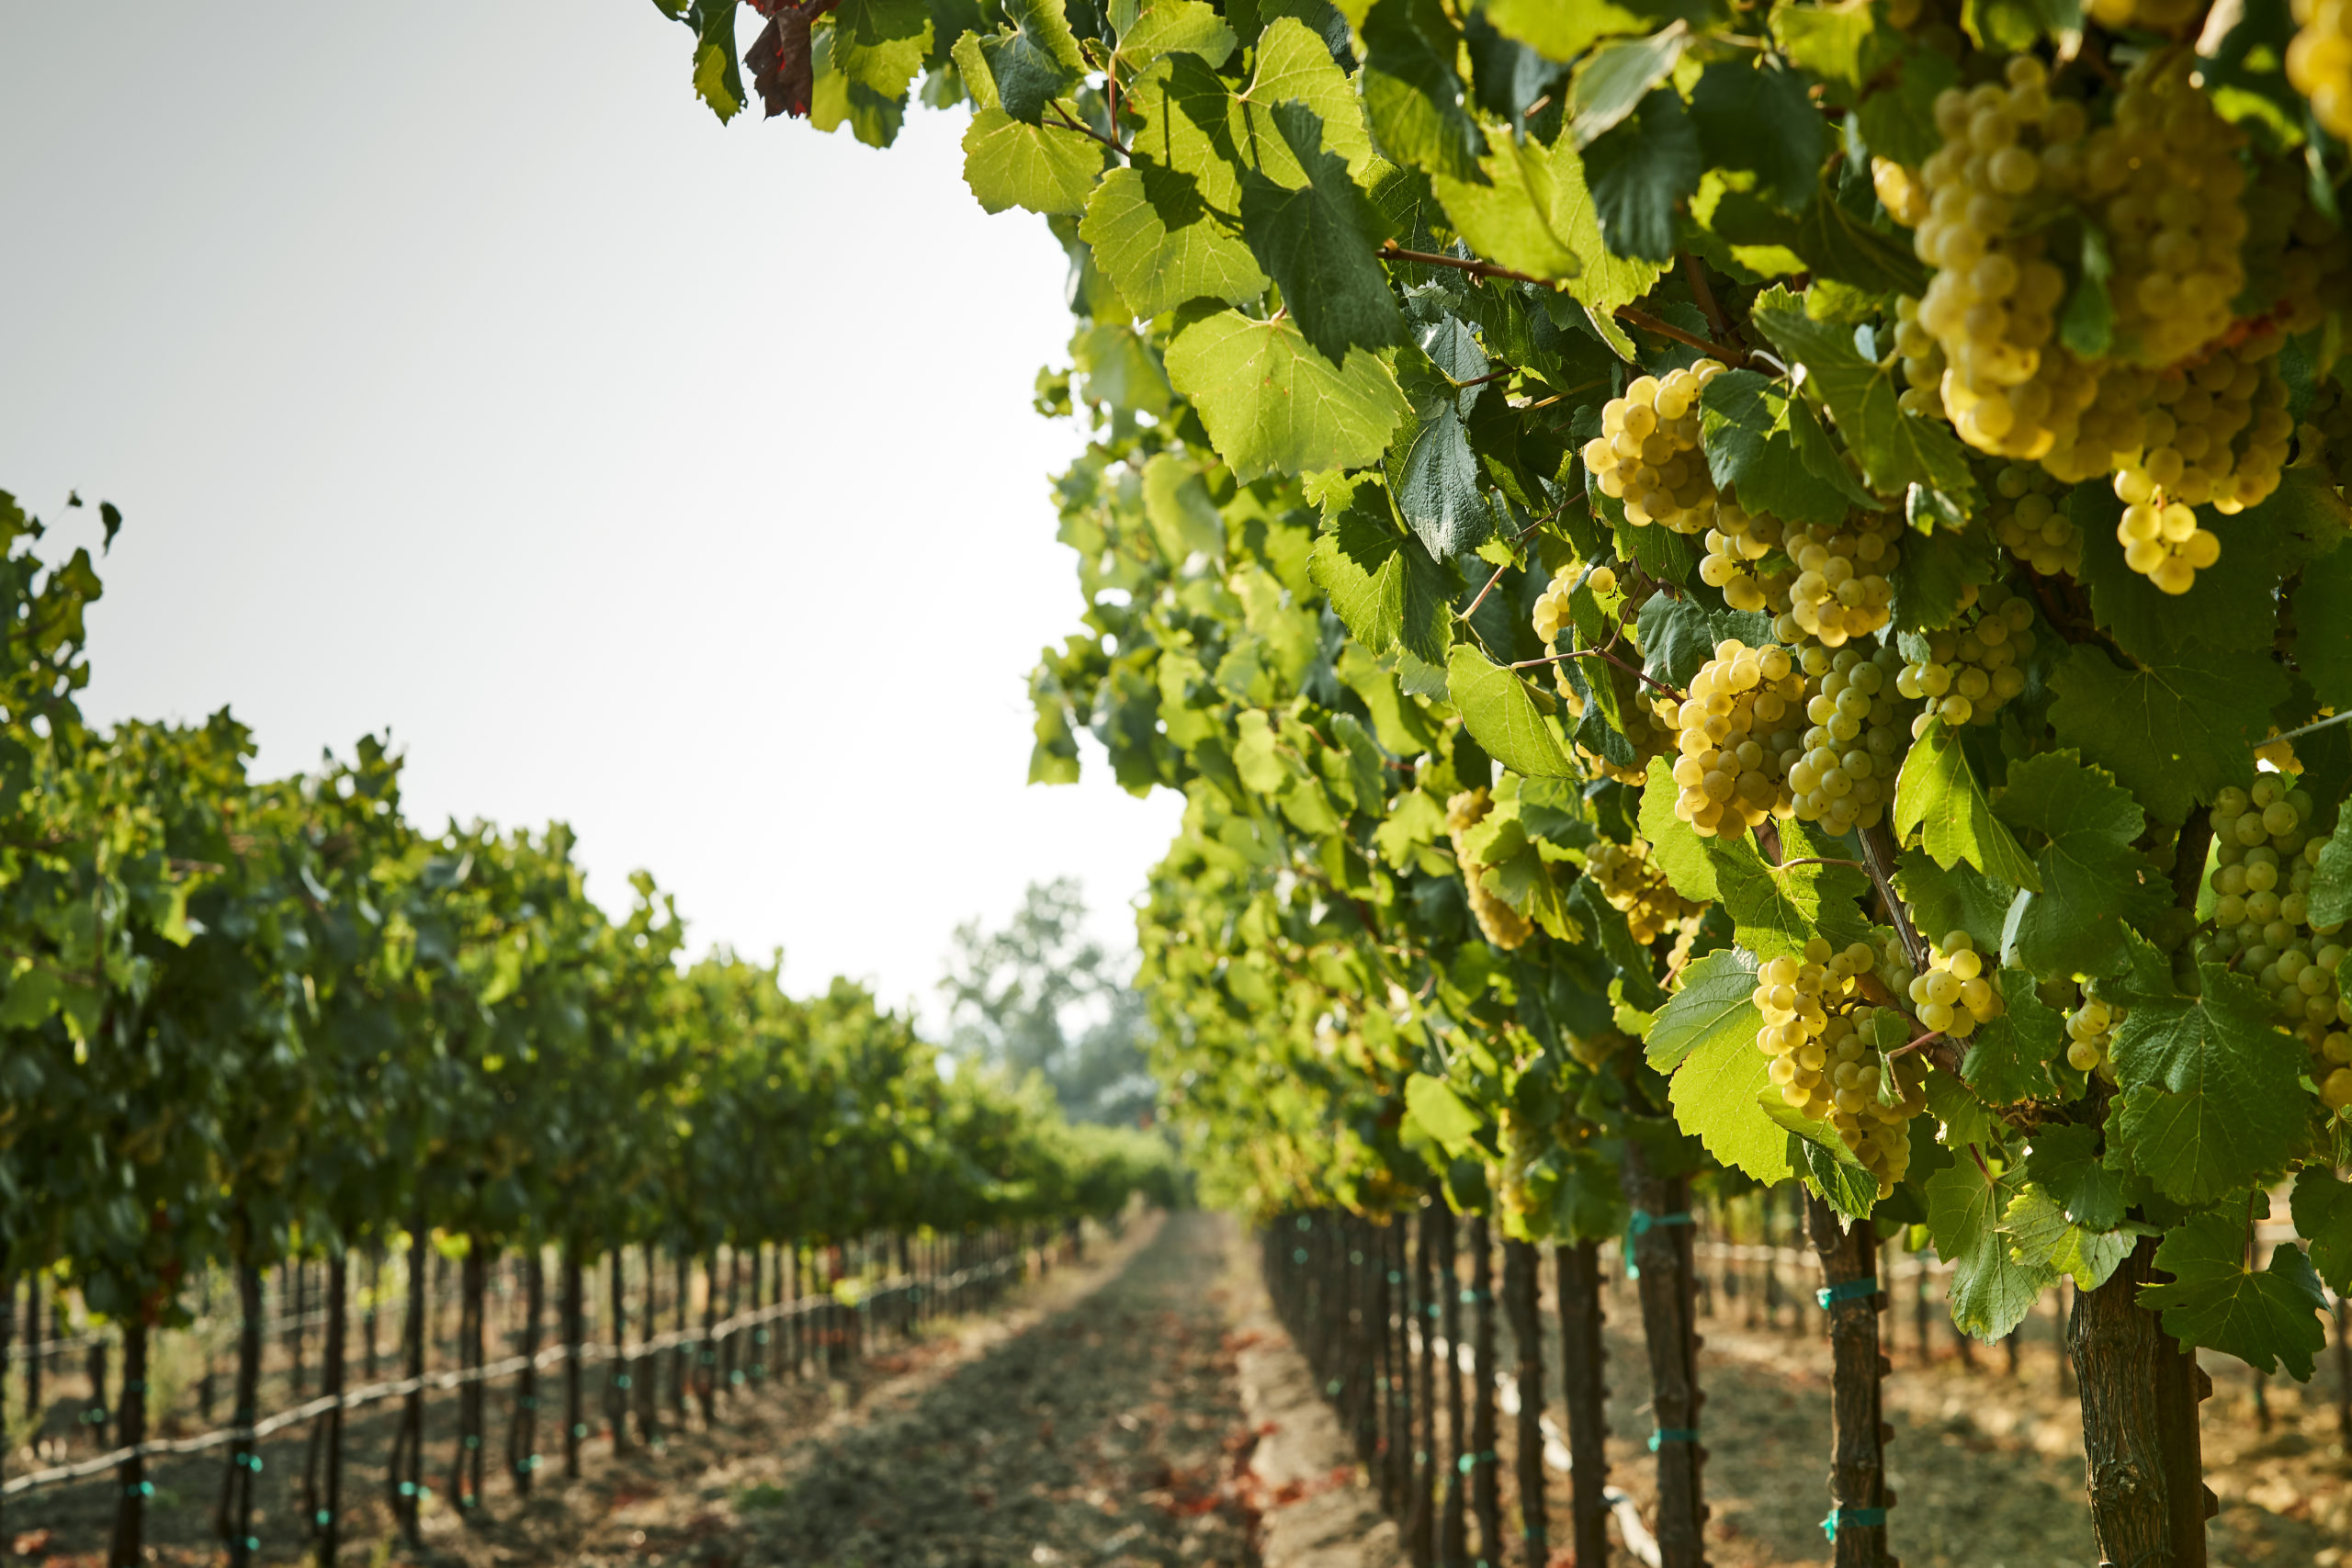 A long row of lush green vines with bright green leaves and plump, yellow grape clusters